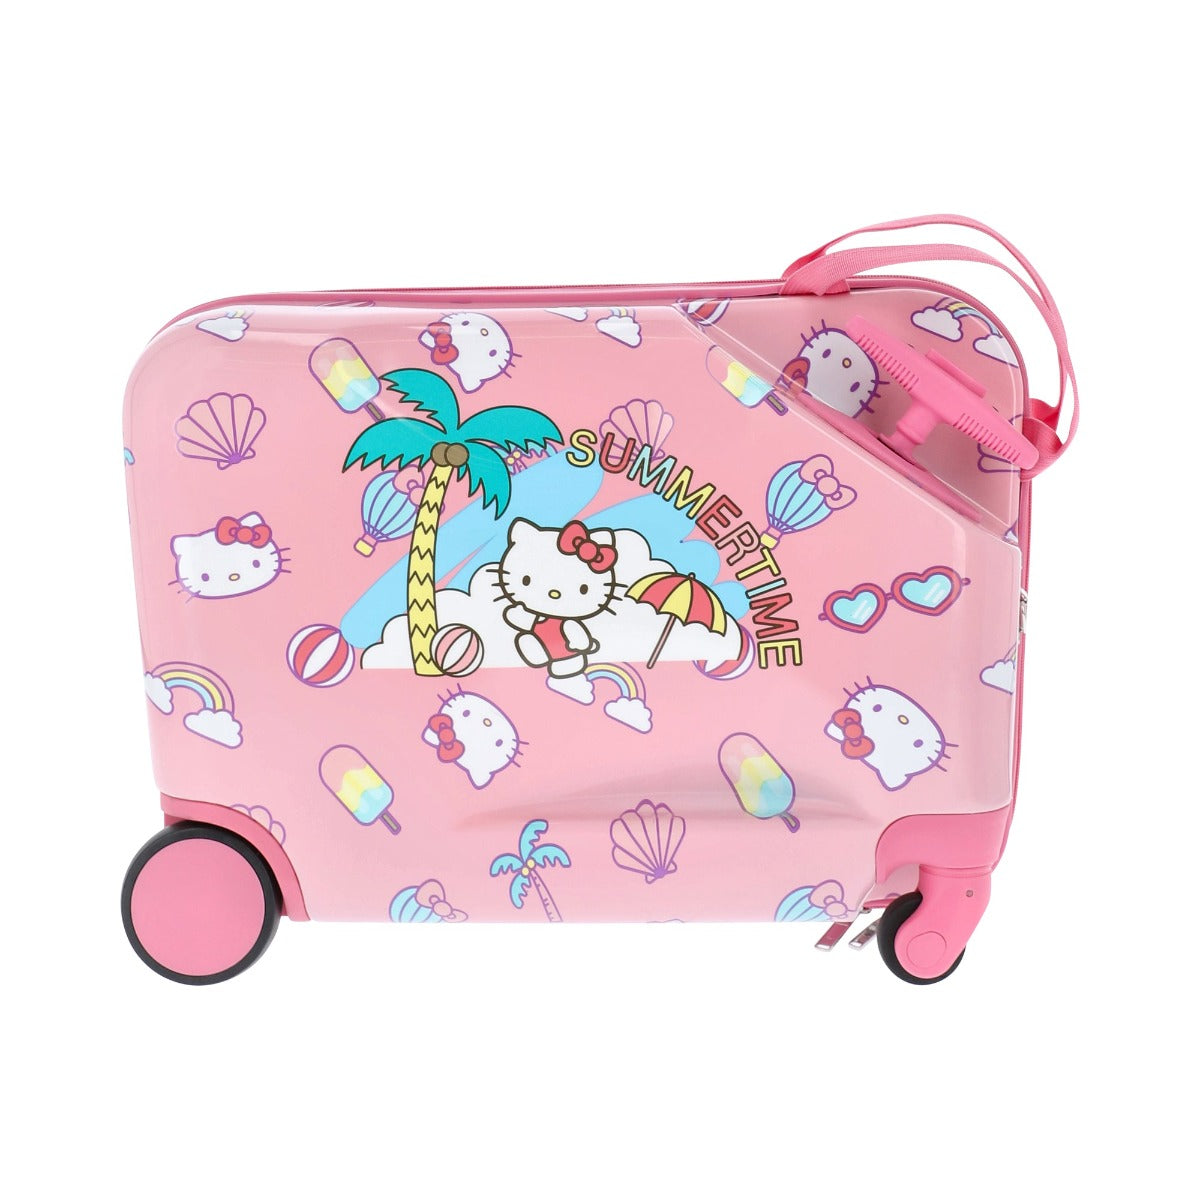 Pink Hello Kitty Summertime Ride-on 14.5" carry-on rolling luggage for kids